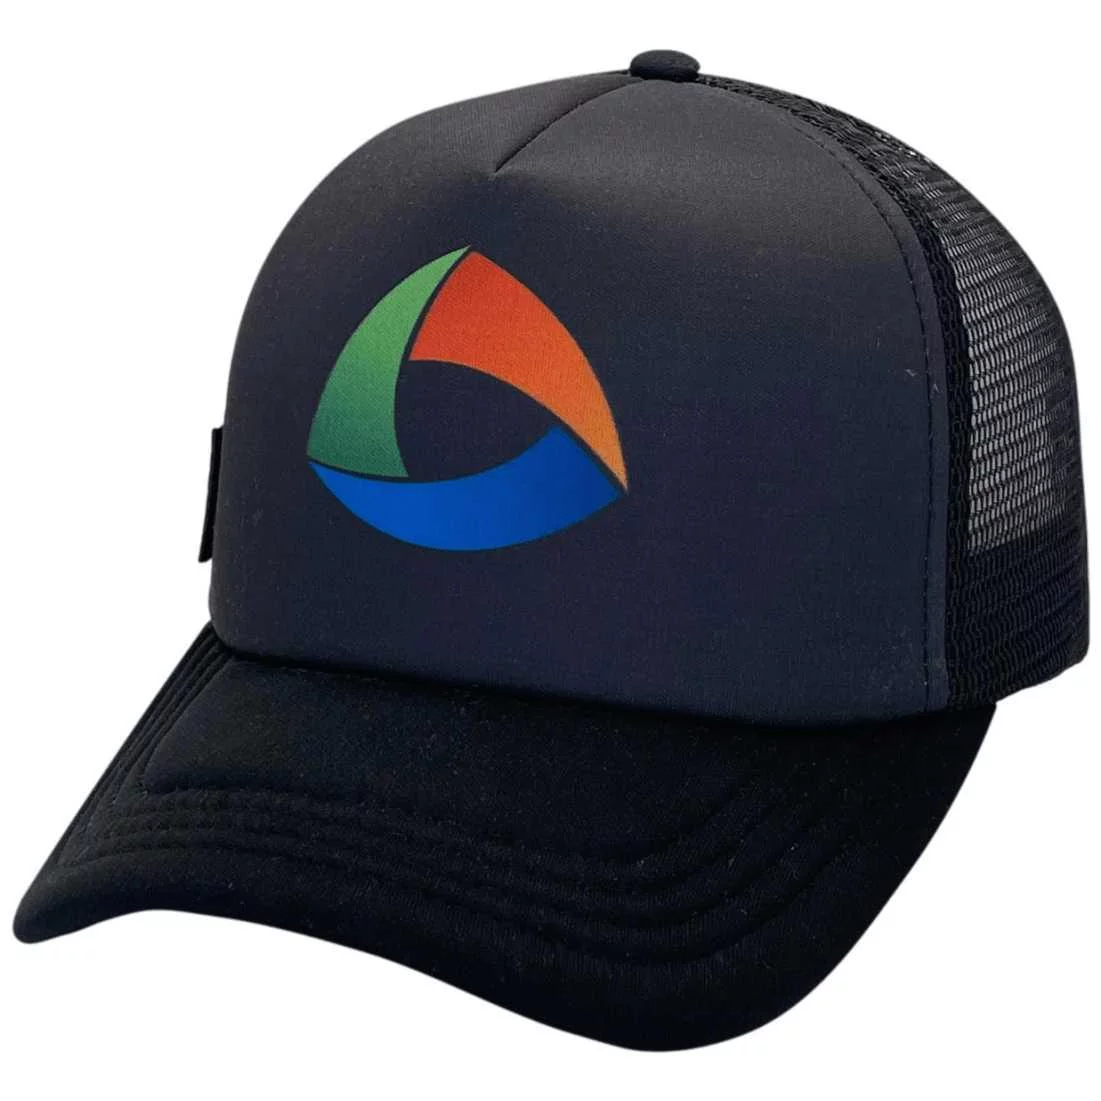 Core Project HP Aussie Foamie Trucker Hat with sublimated print -Black